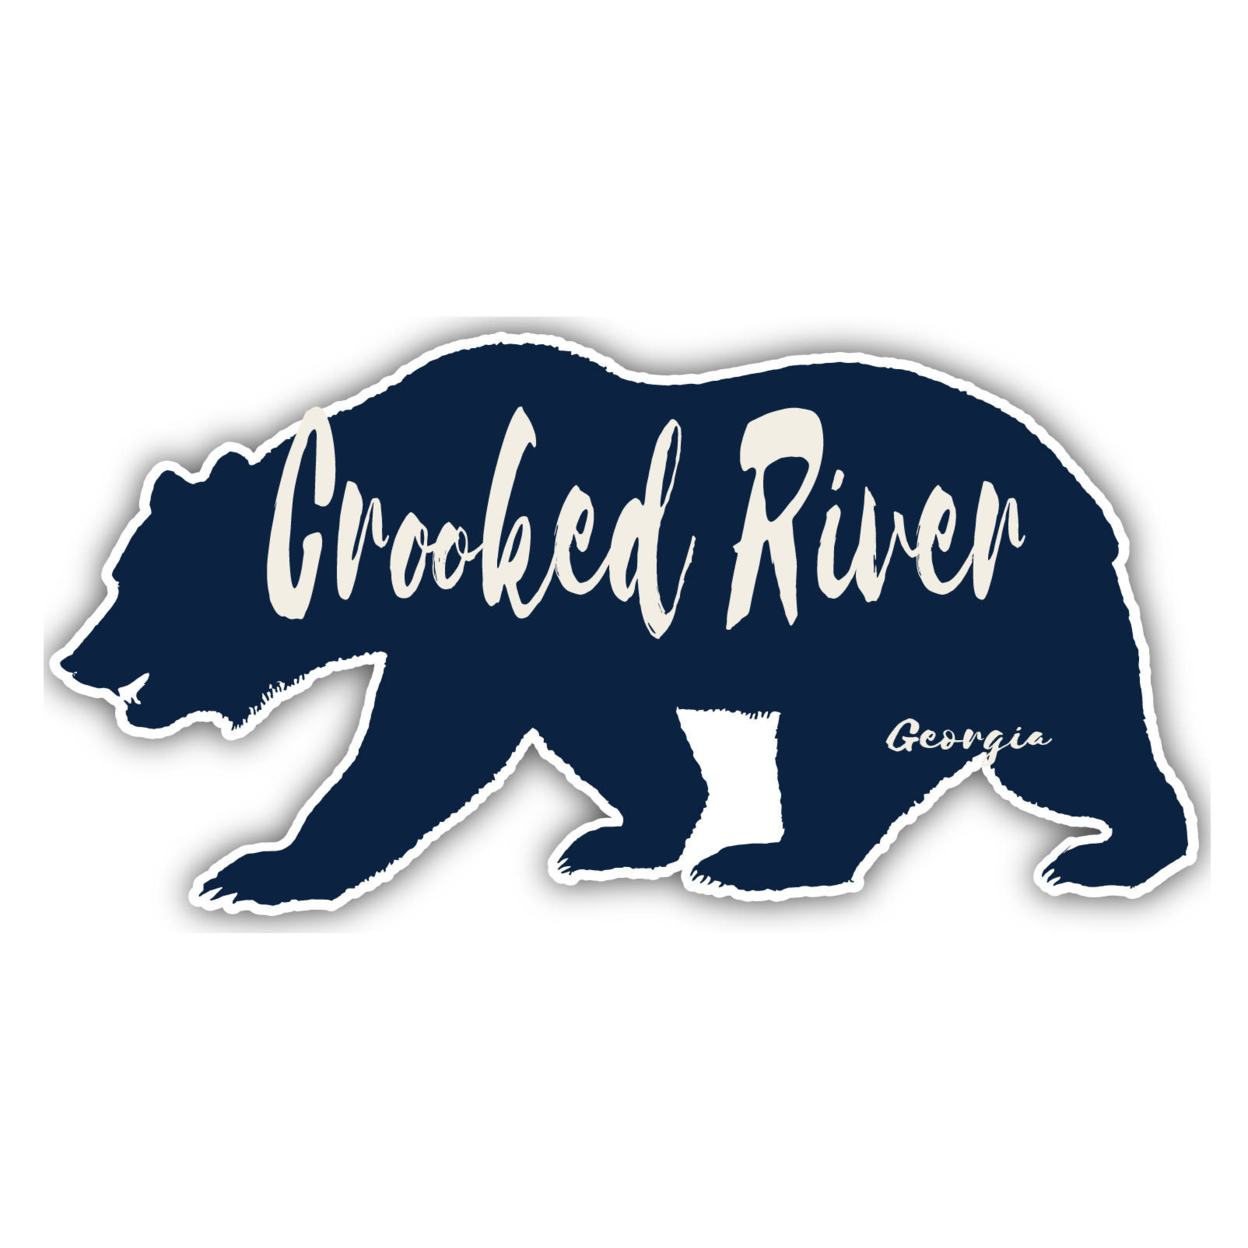 Crooked River Georgia Souvenir Decorative Stickers (Choose Theme And Size) - 4-Pack, 2-Inch, Bear